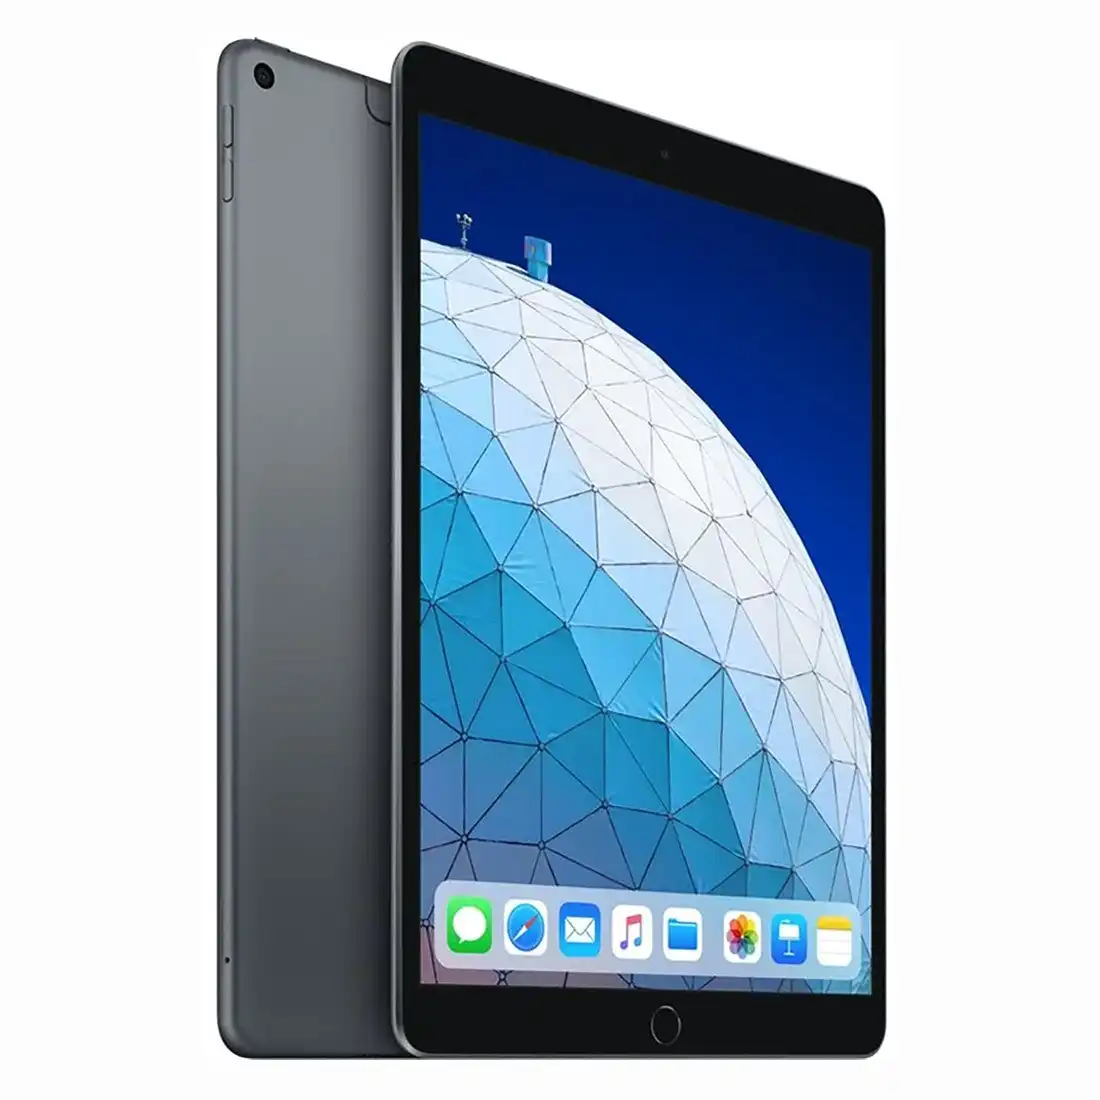 Apple iPad Air (10.5", 3rd Gen) Wi-Fi + Cellular 64GB Space Grey [Refurbished] - Excellent